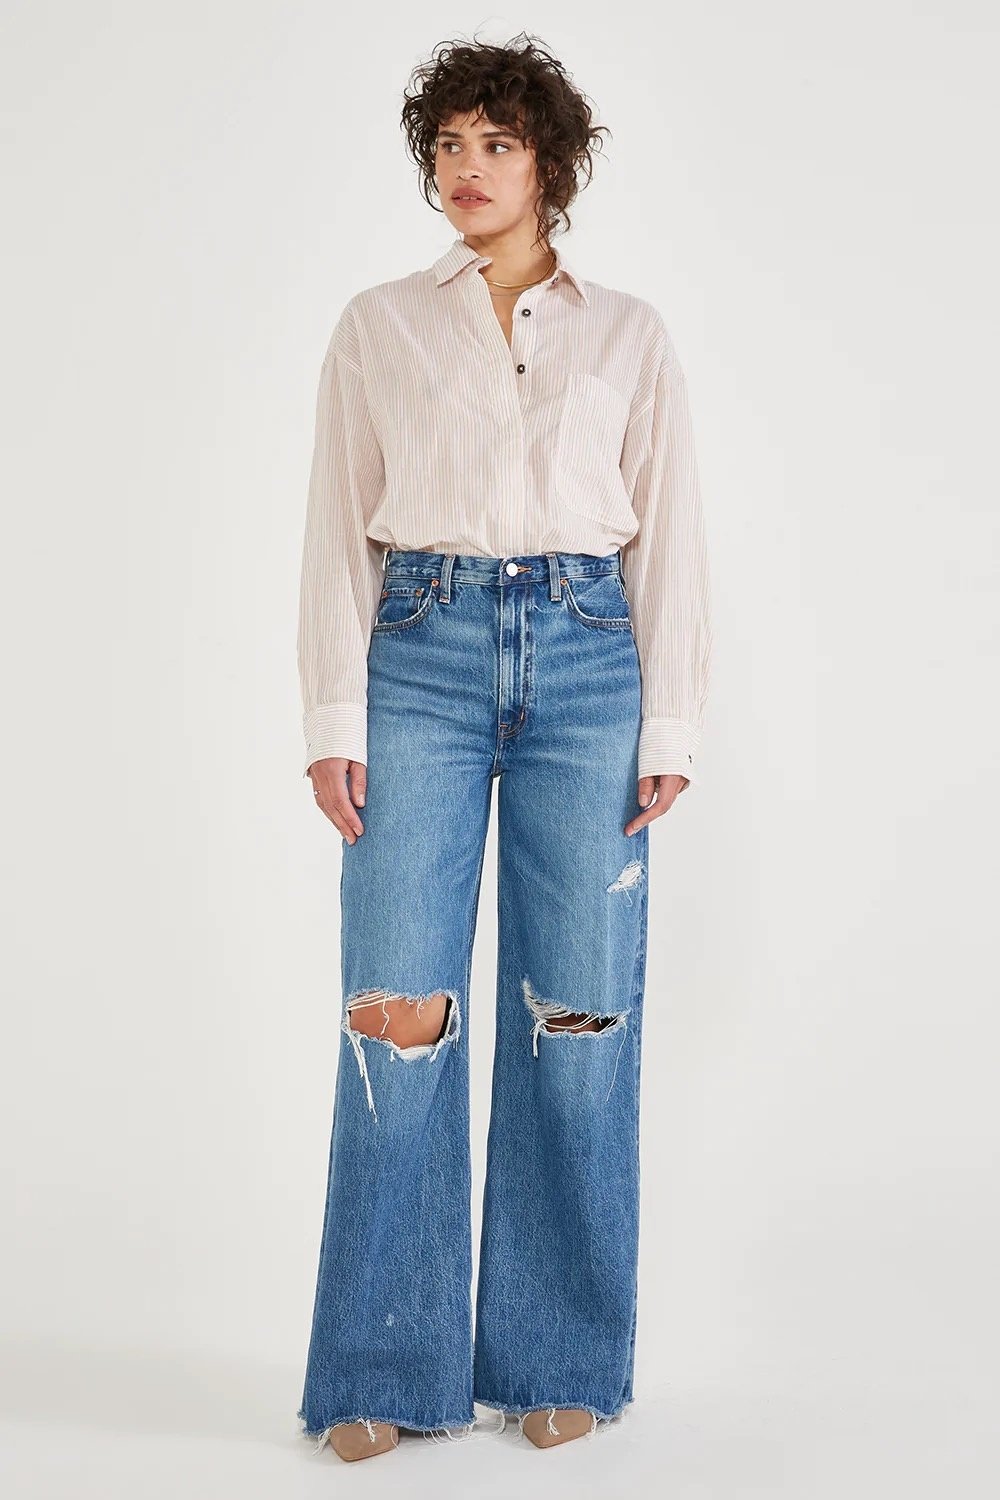 Oxford Shirt and Wide Leg Jeans